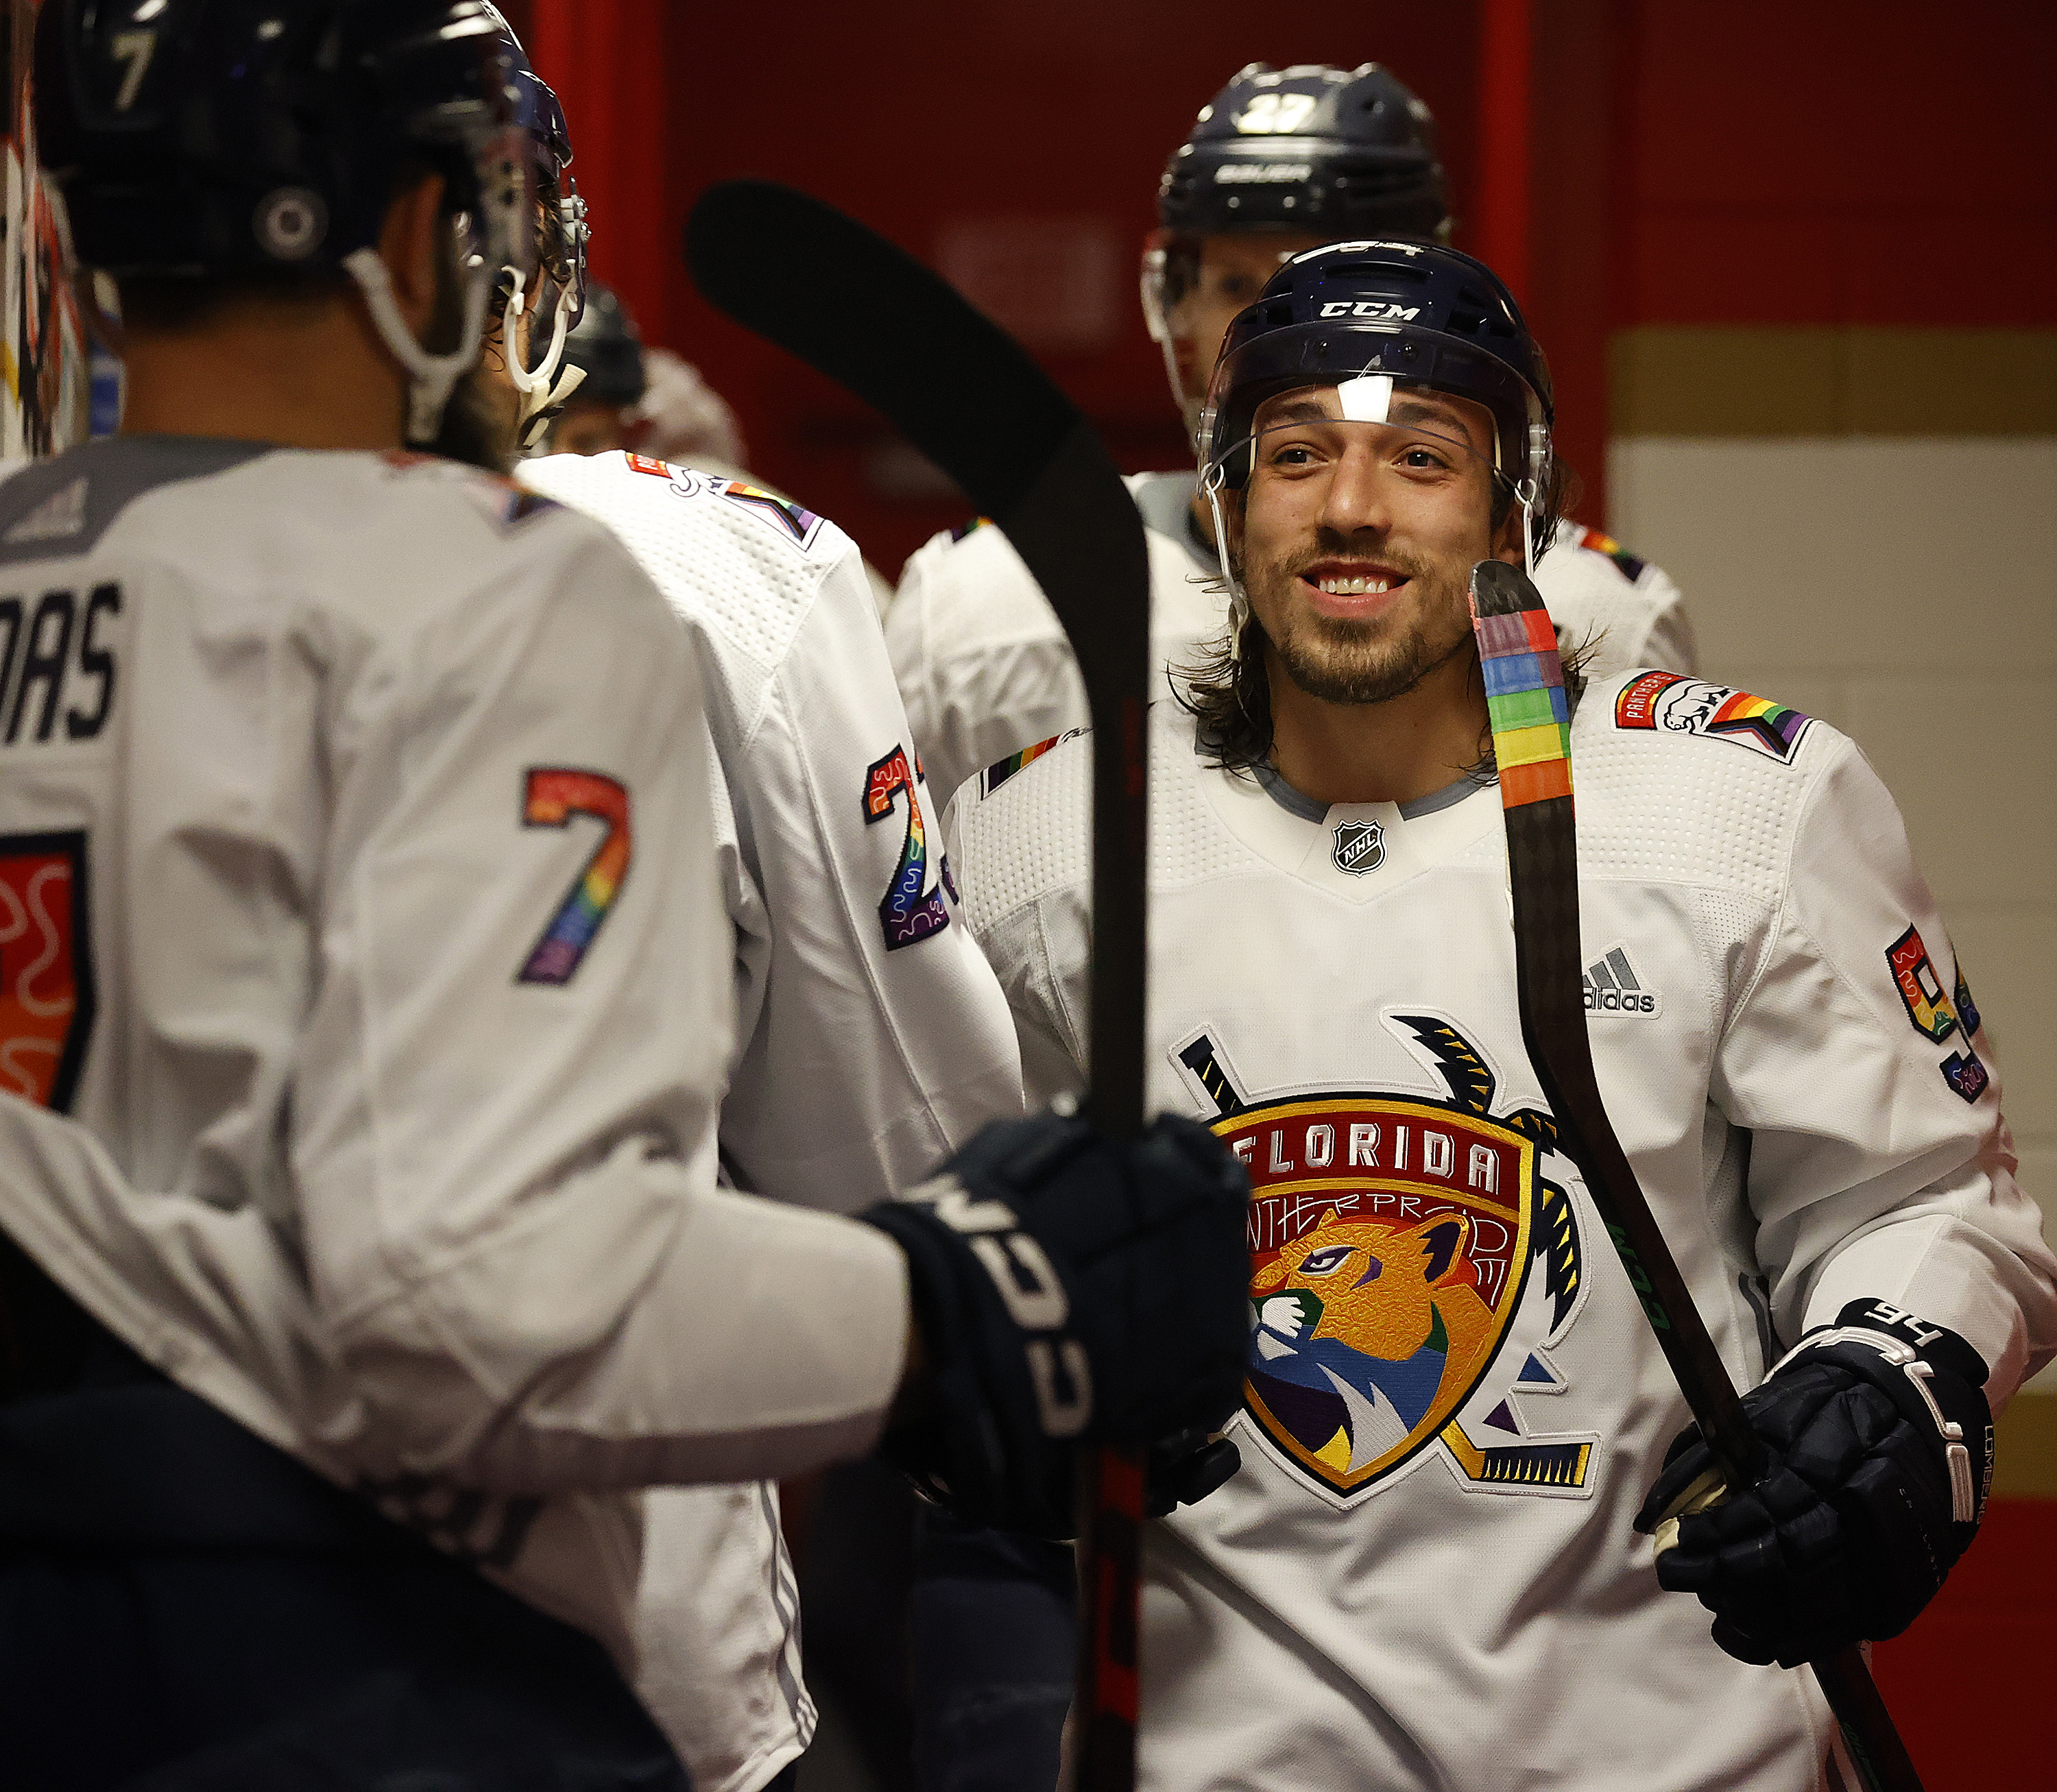 Ryan Lomberg, right, of the Florida Panthers greets teammates before heading out to the ice for warm ups during Pride Night on March 23.